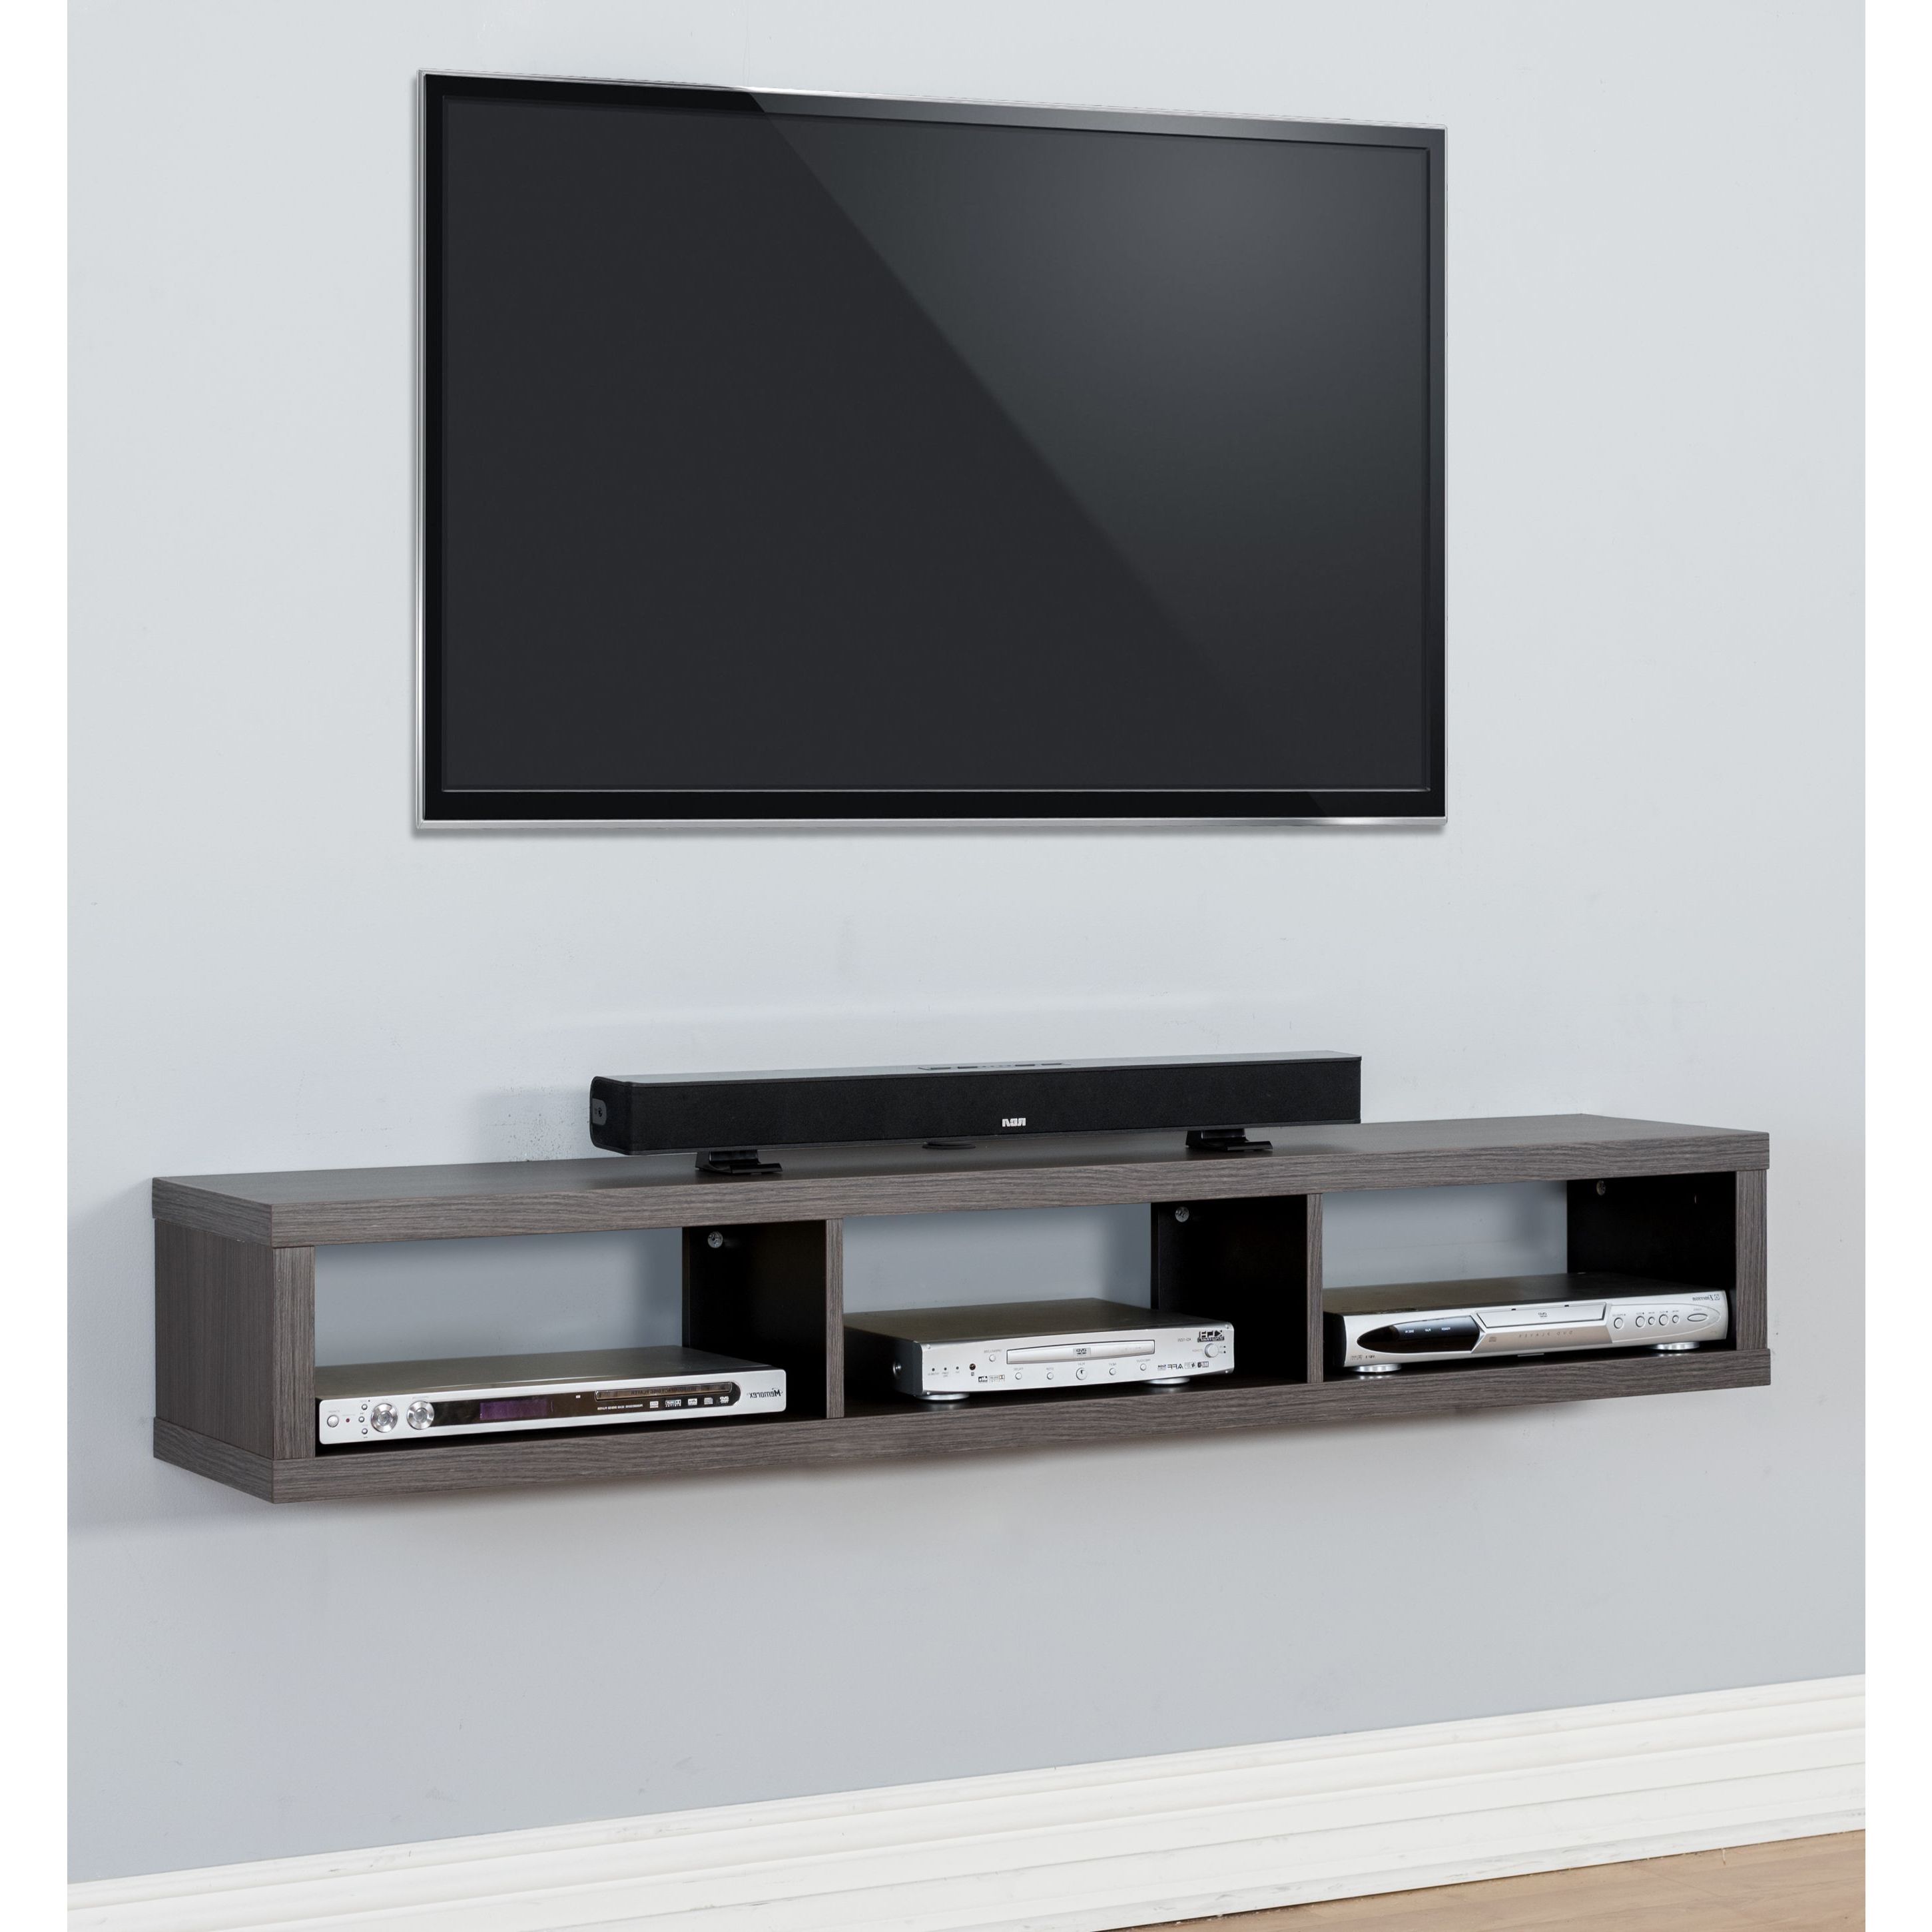 The Functional And Upscale Appearance Of This Wall Mounted Tv Throughout Preferred Shelves For Tvs On The Wall (View 12 of 20)